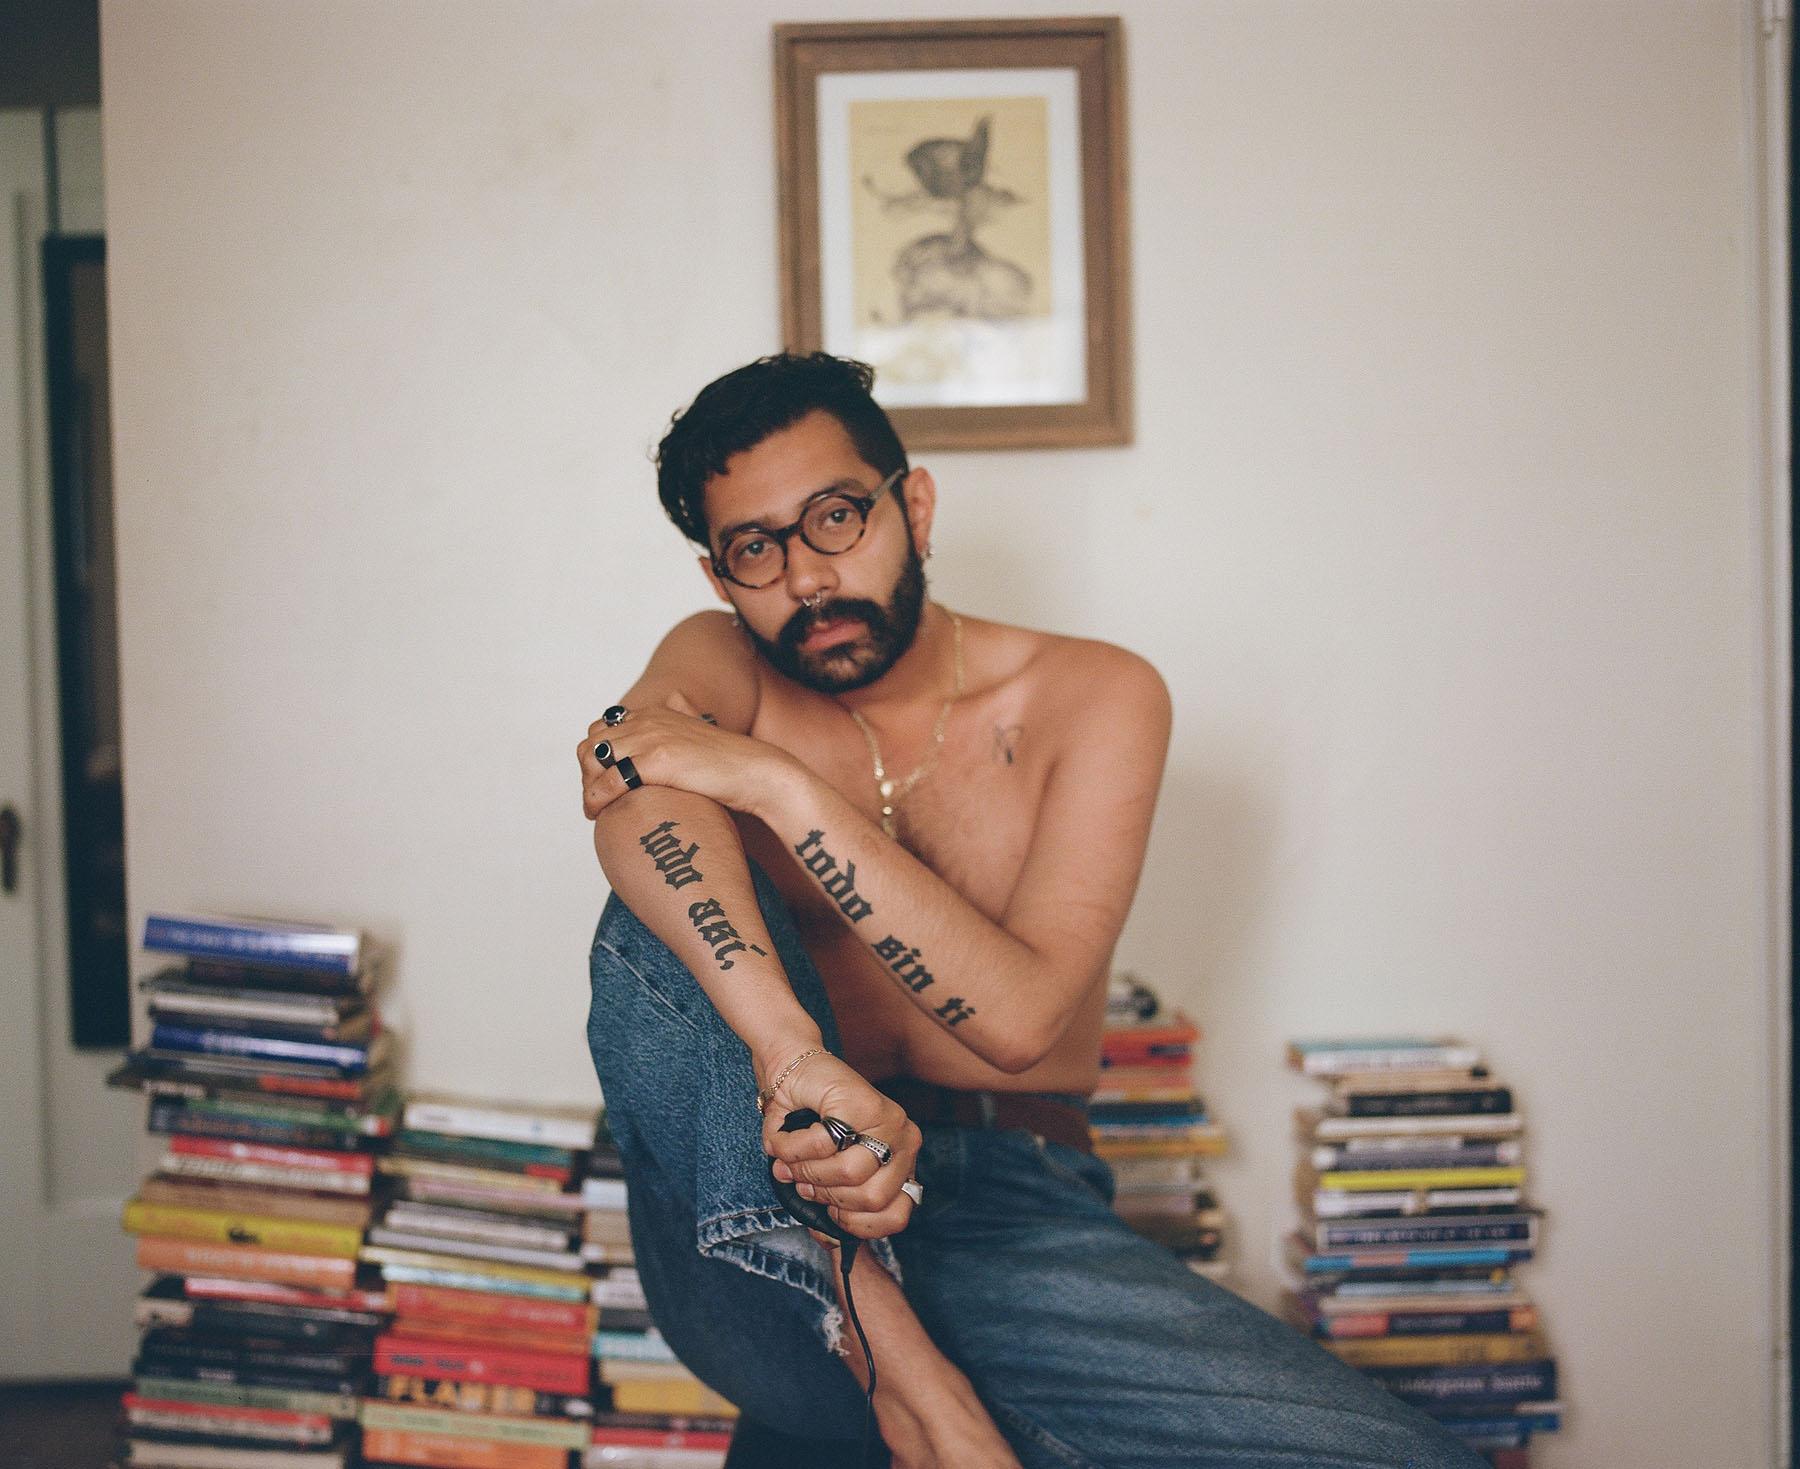 A portrait photo of a person in jeans and no shirt sitting on a desk with piles of books behind them